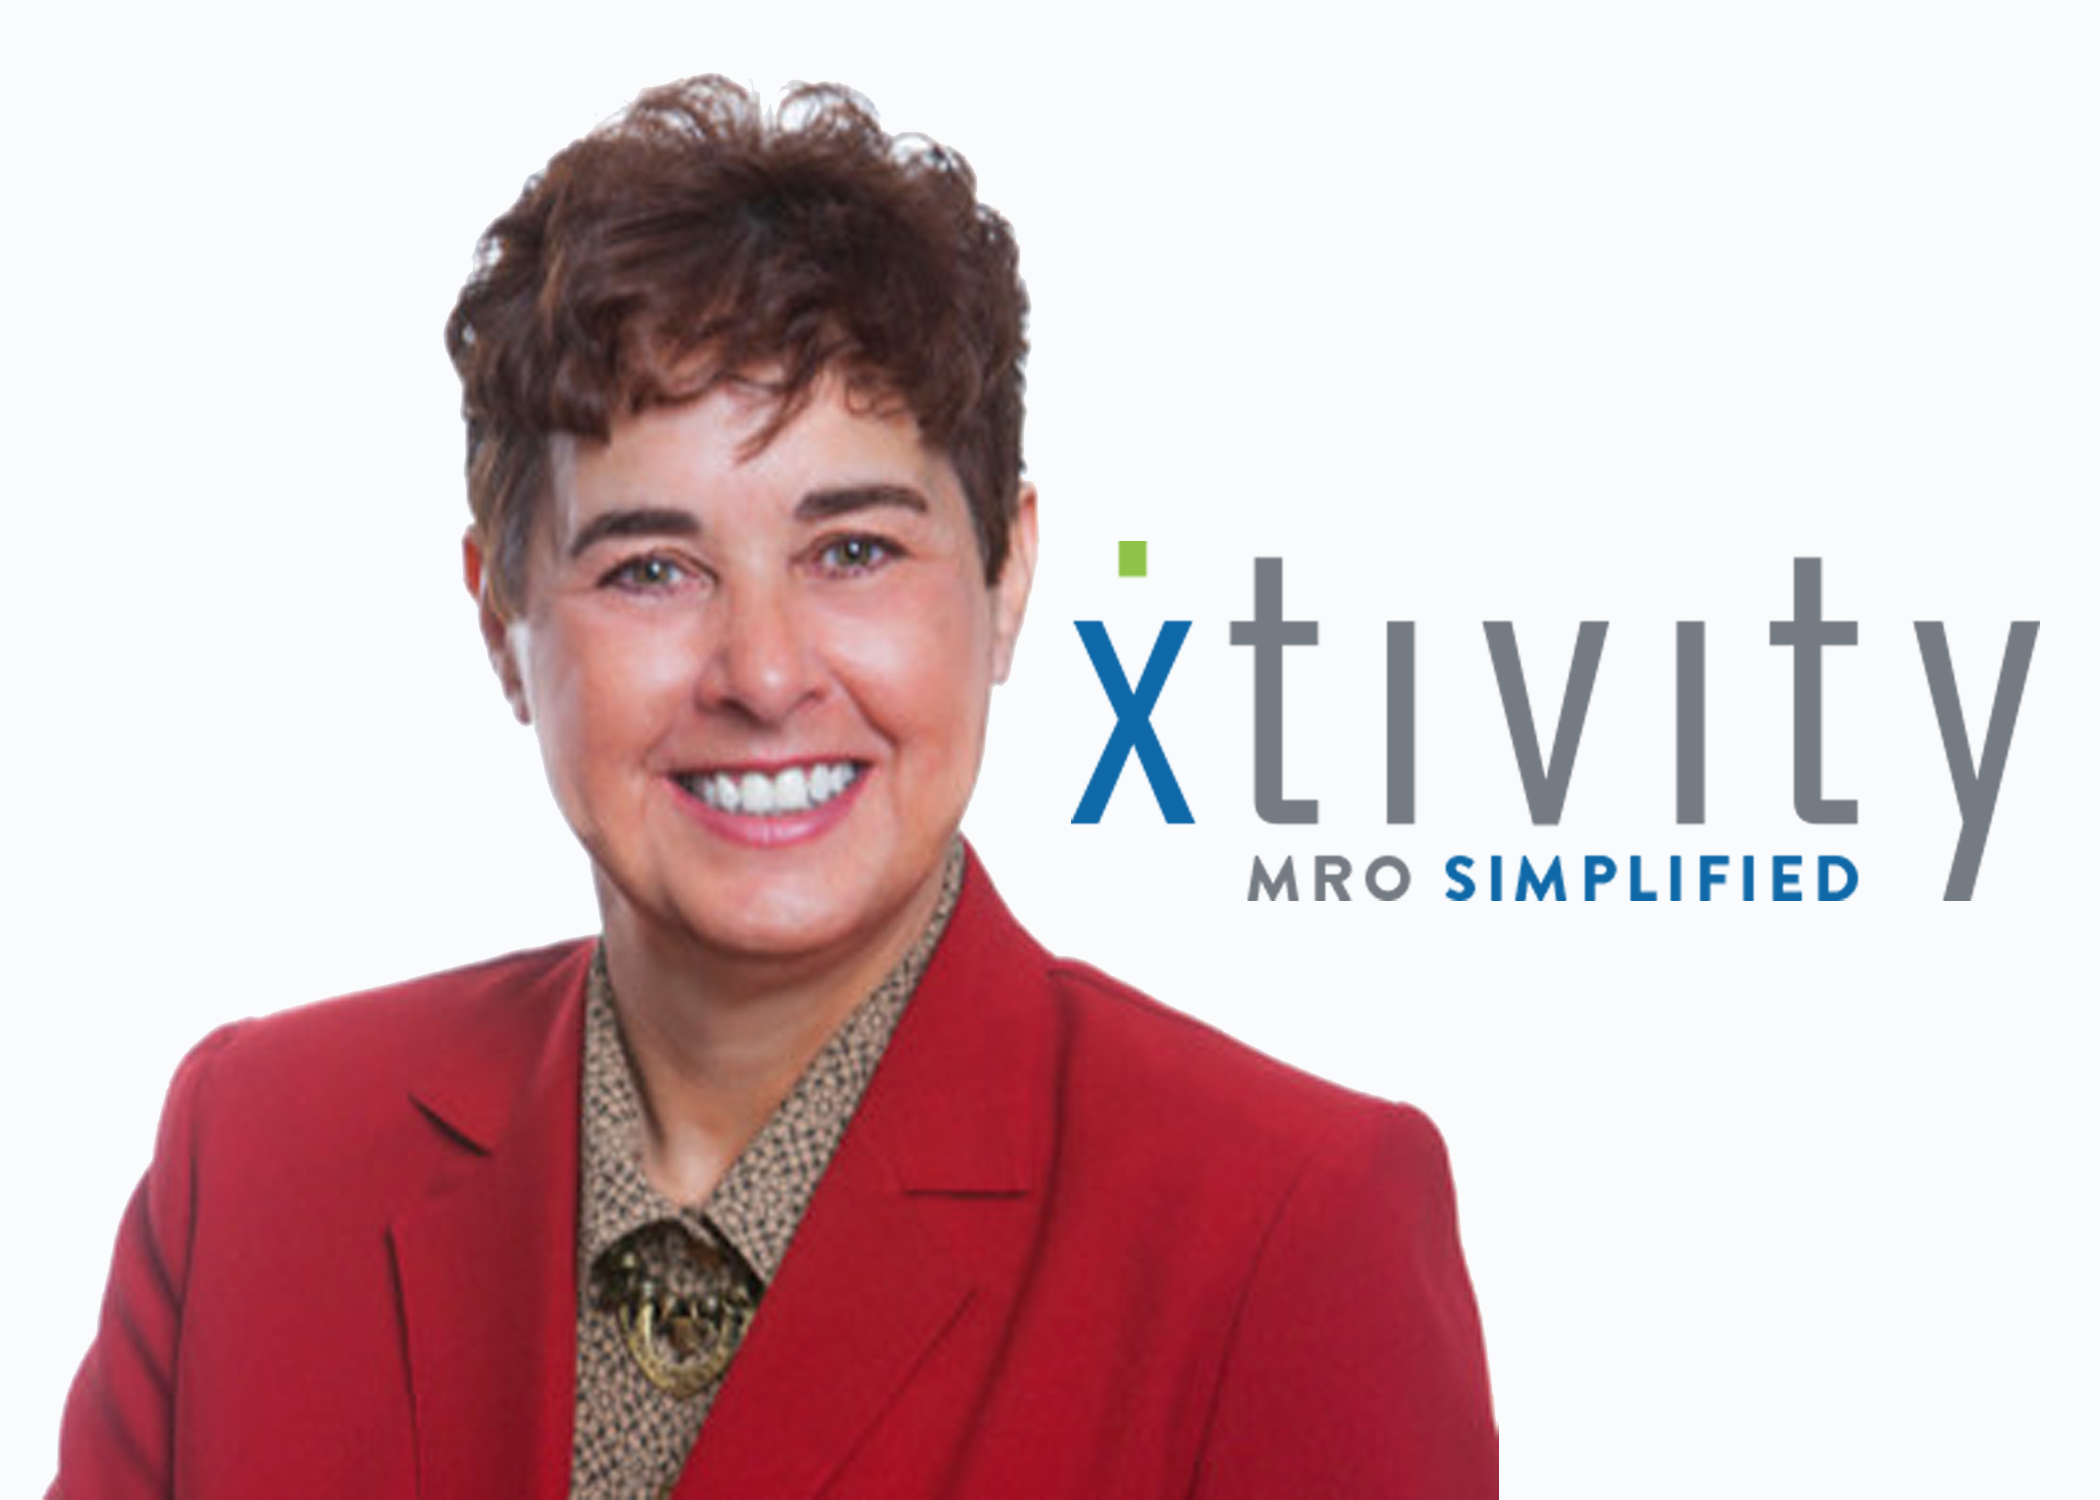 You are currently viewing Xtivity Strengthens its Service Capabilities with Addition of MRO Materials Management Leader